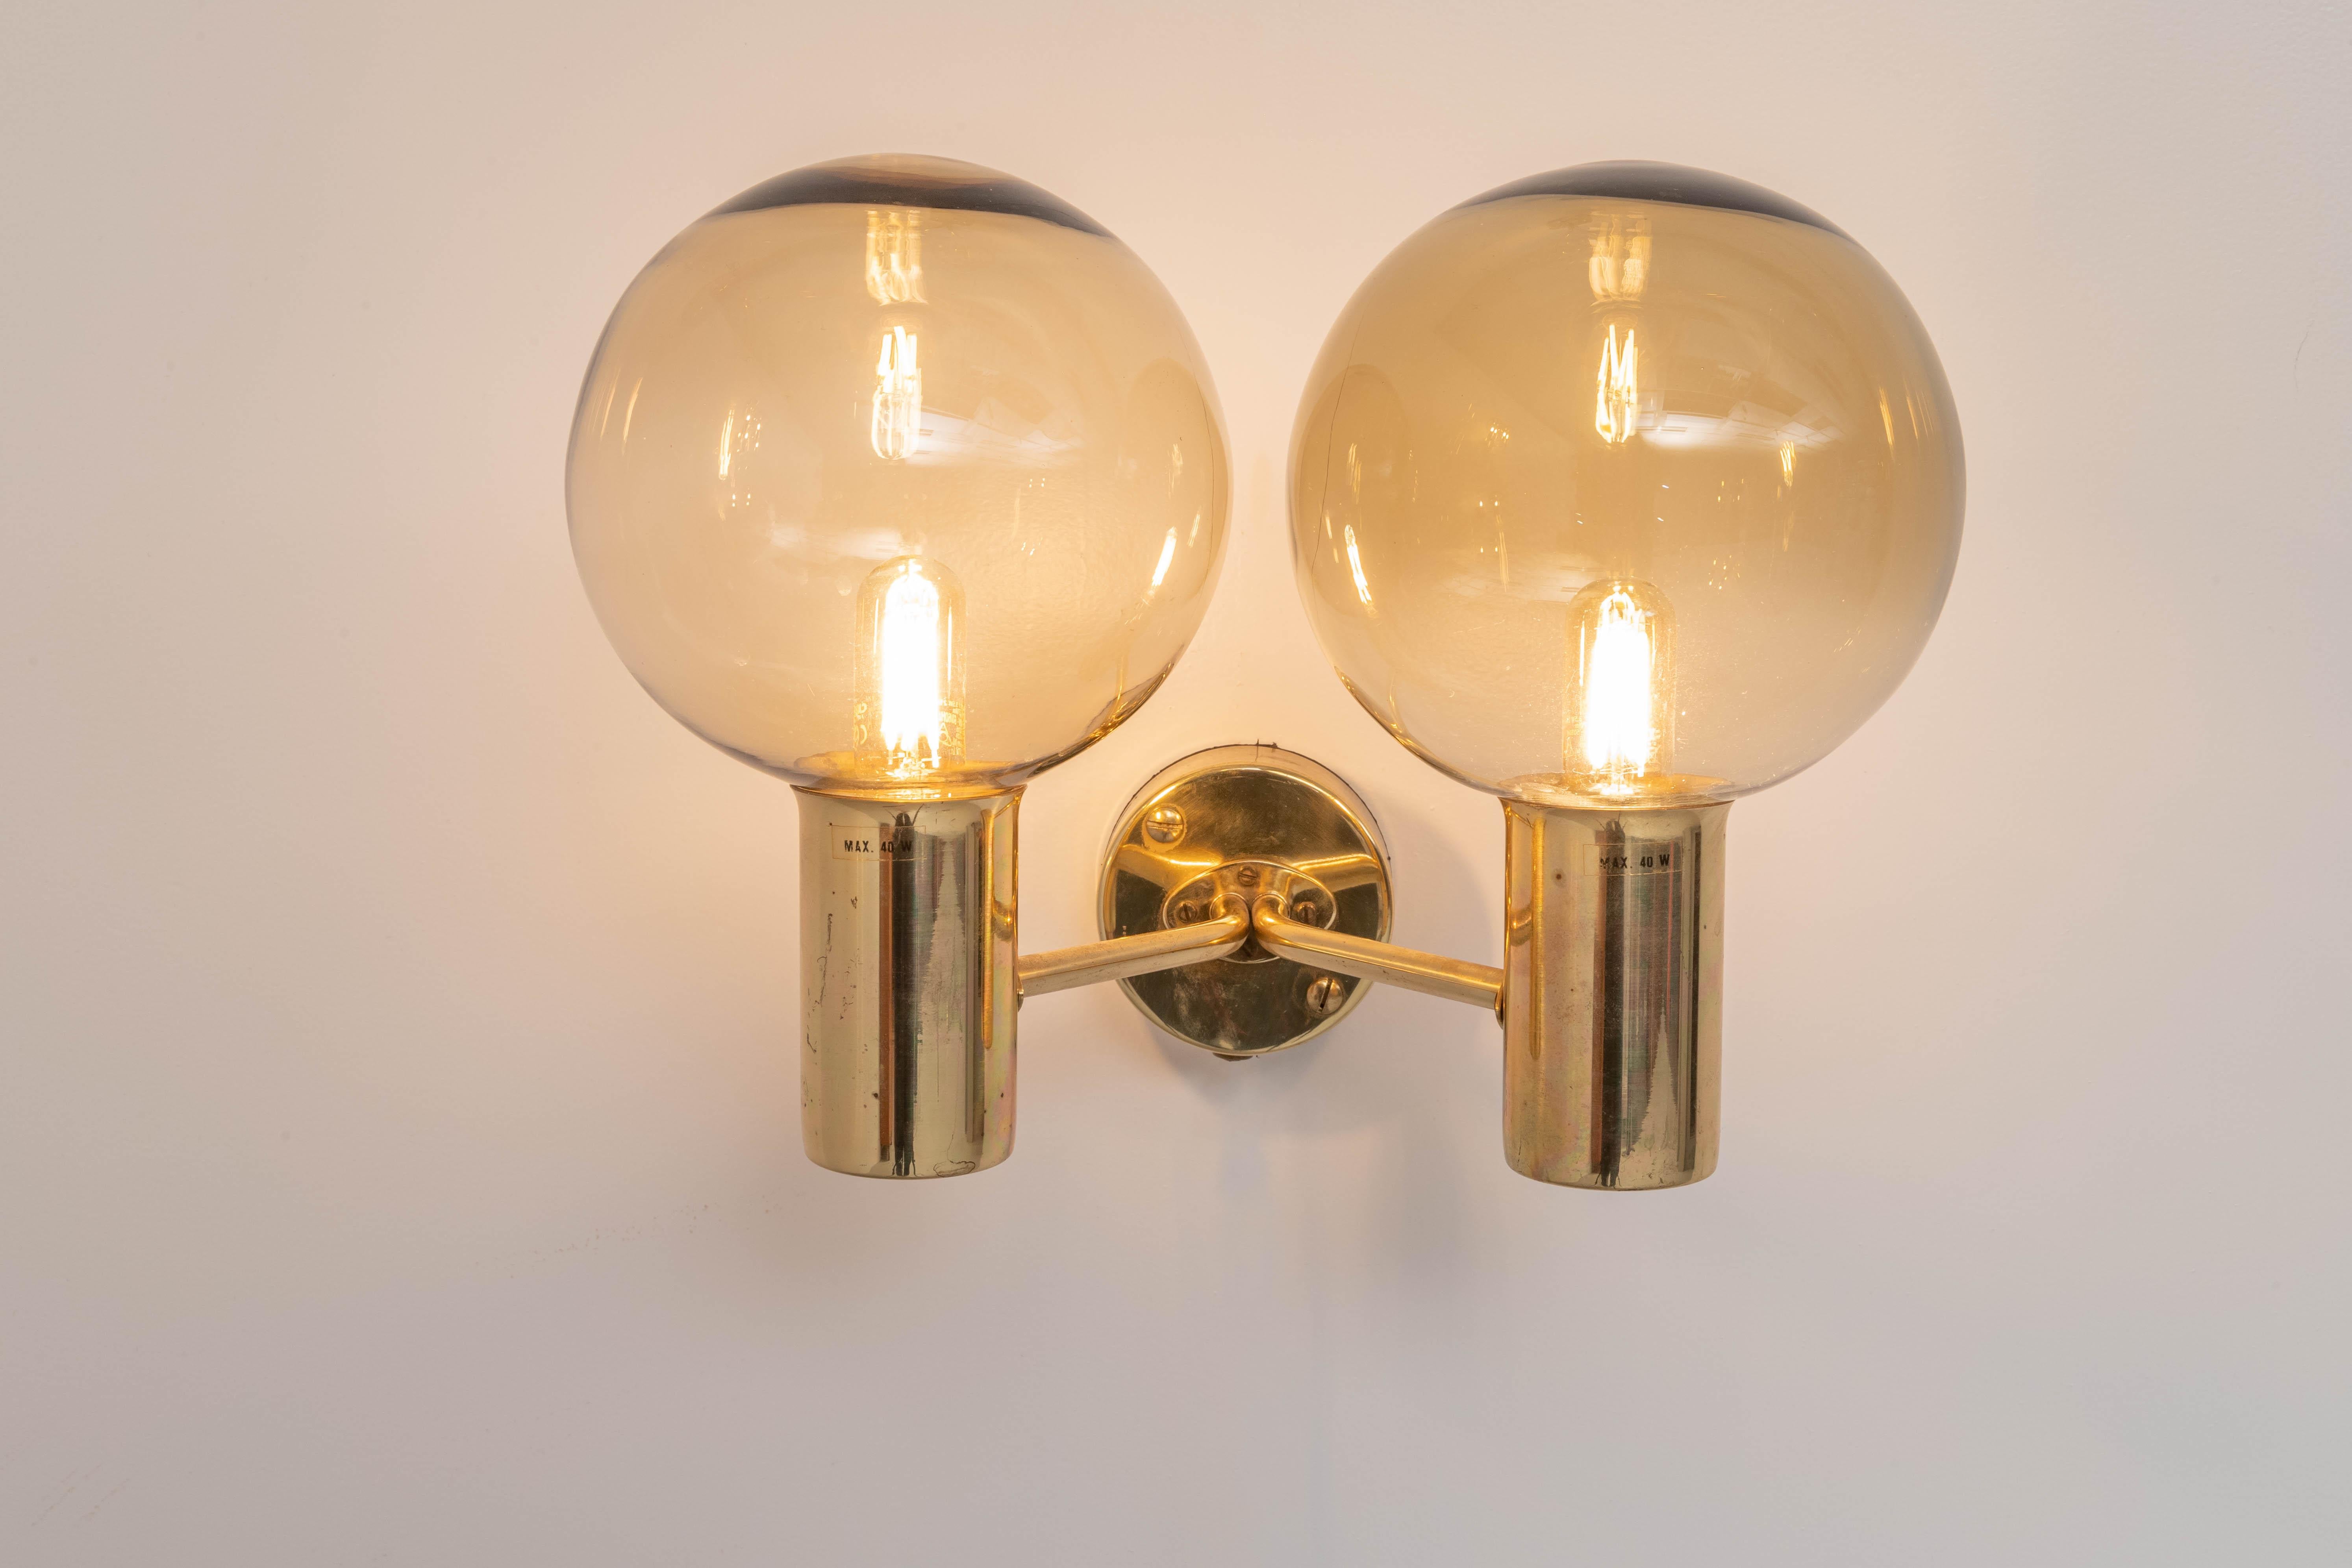 Wall light of the famous V 149/2 series with double executed light points in brass and light-brown smoked glass by Hans-Agne Jakobsson, 'The master of dimmed light'. 

The further up north you go, the longer and darker the winters, so the